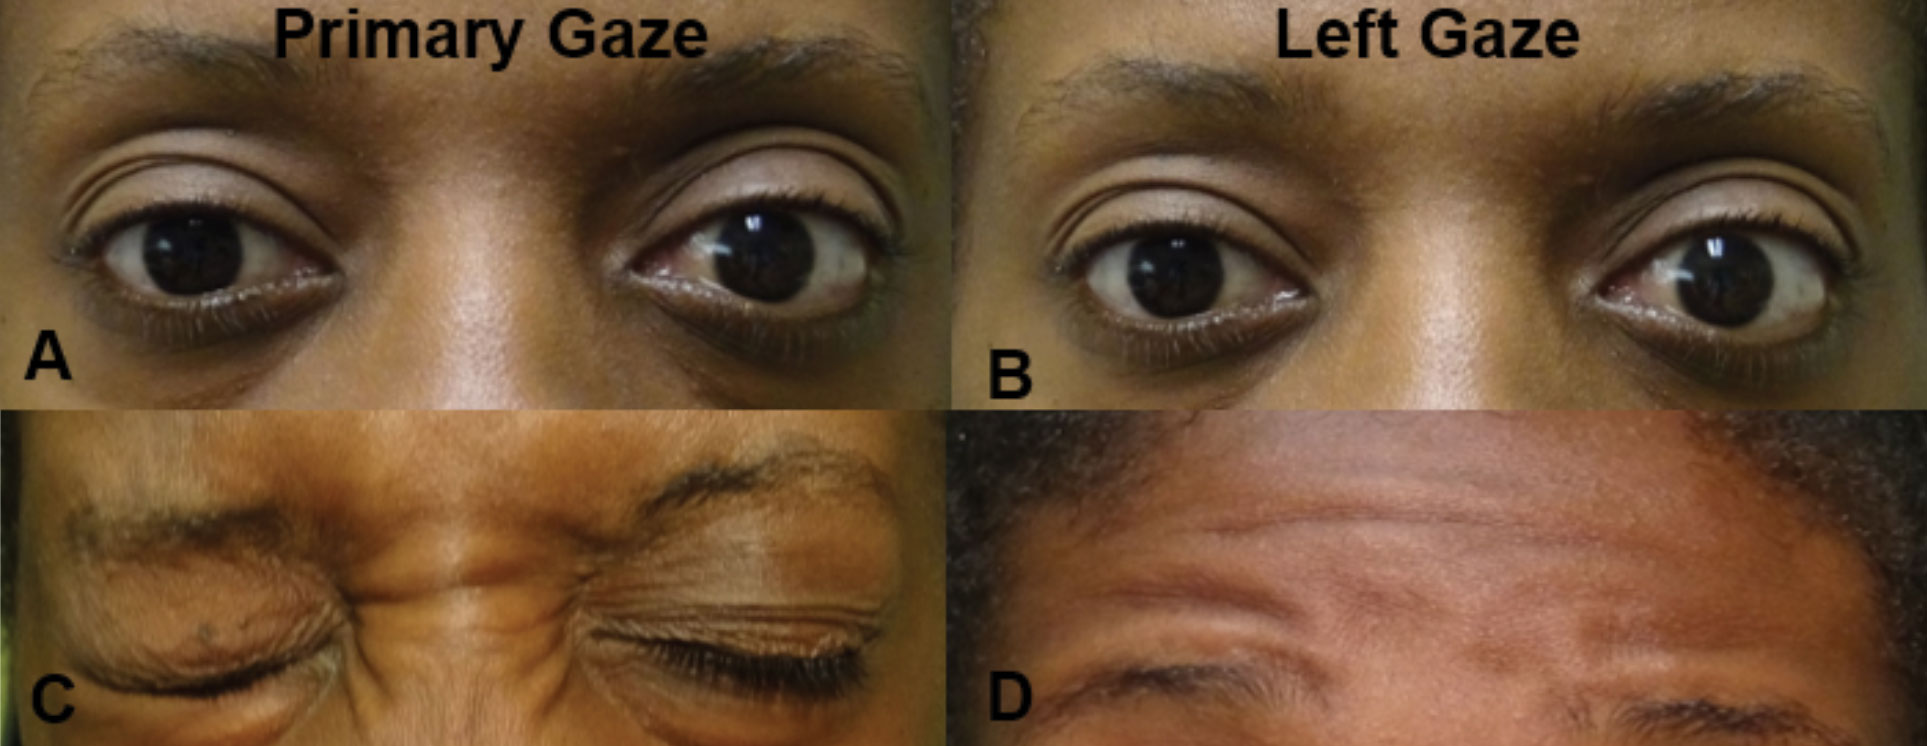 In primary gaze (A), there is a noted difference in palpebral apertures due to the left lower lid lagophthalmos. In left gaze (B), there is no movement of either eye consistent with a left gaze palsy (likely at the left CN VI nucleus). There was associated left orbicularis oculi weakness (C) and left frontalis weakness (D), both consistent with a partial left CN VII lesion. The combination of these findings localizes the lesion to the left pons involving both the CN VI nucleus and CN VII fasiculus.